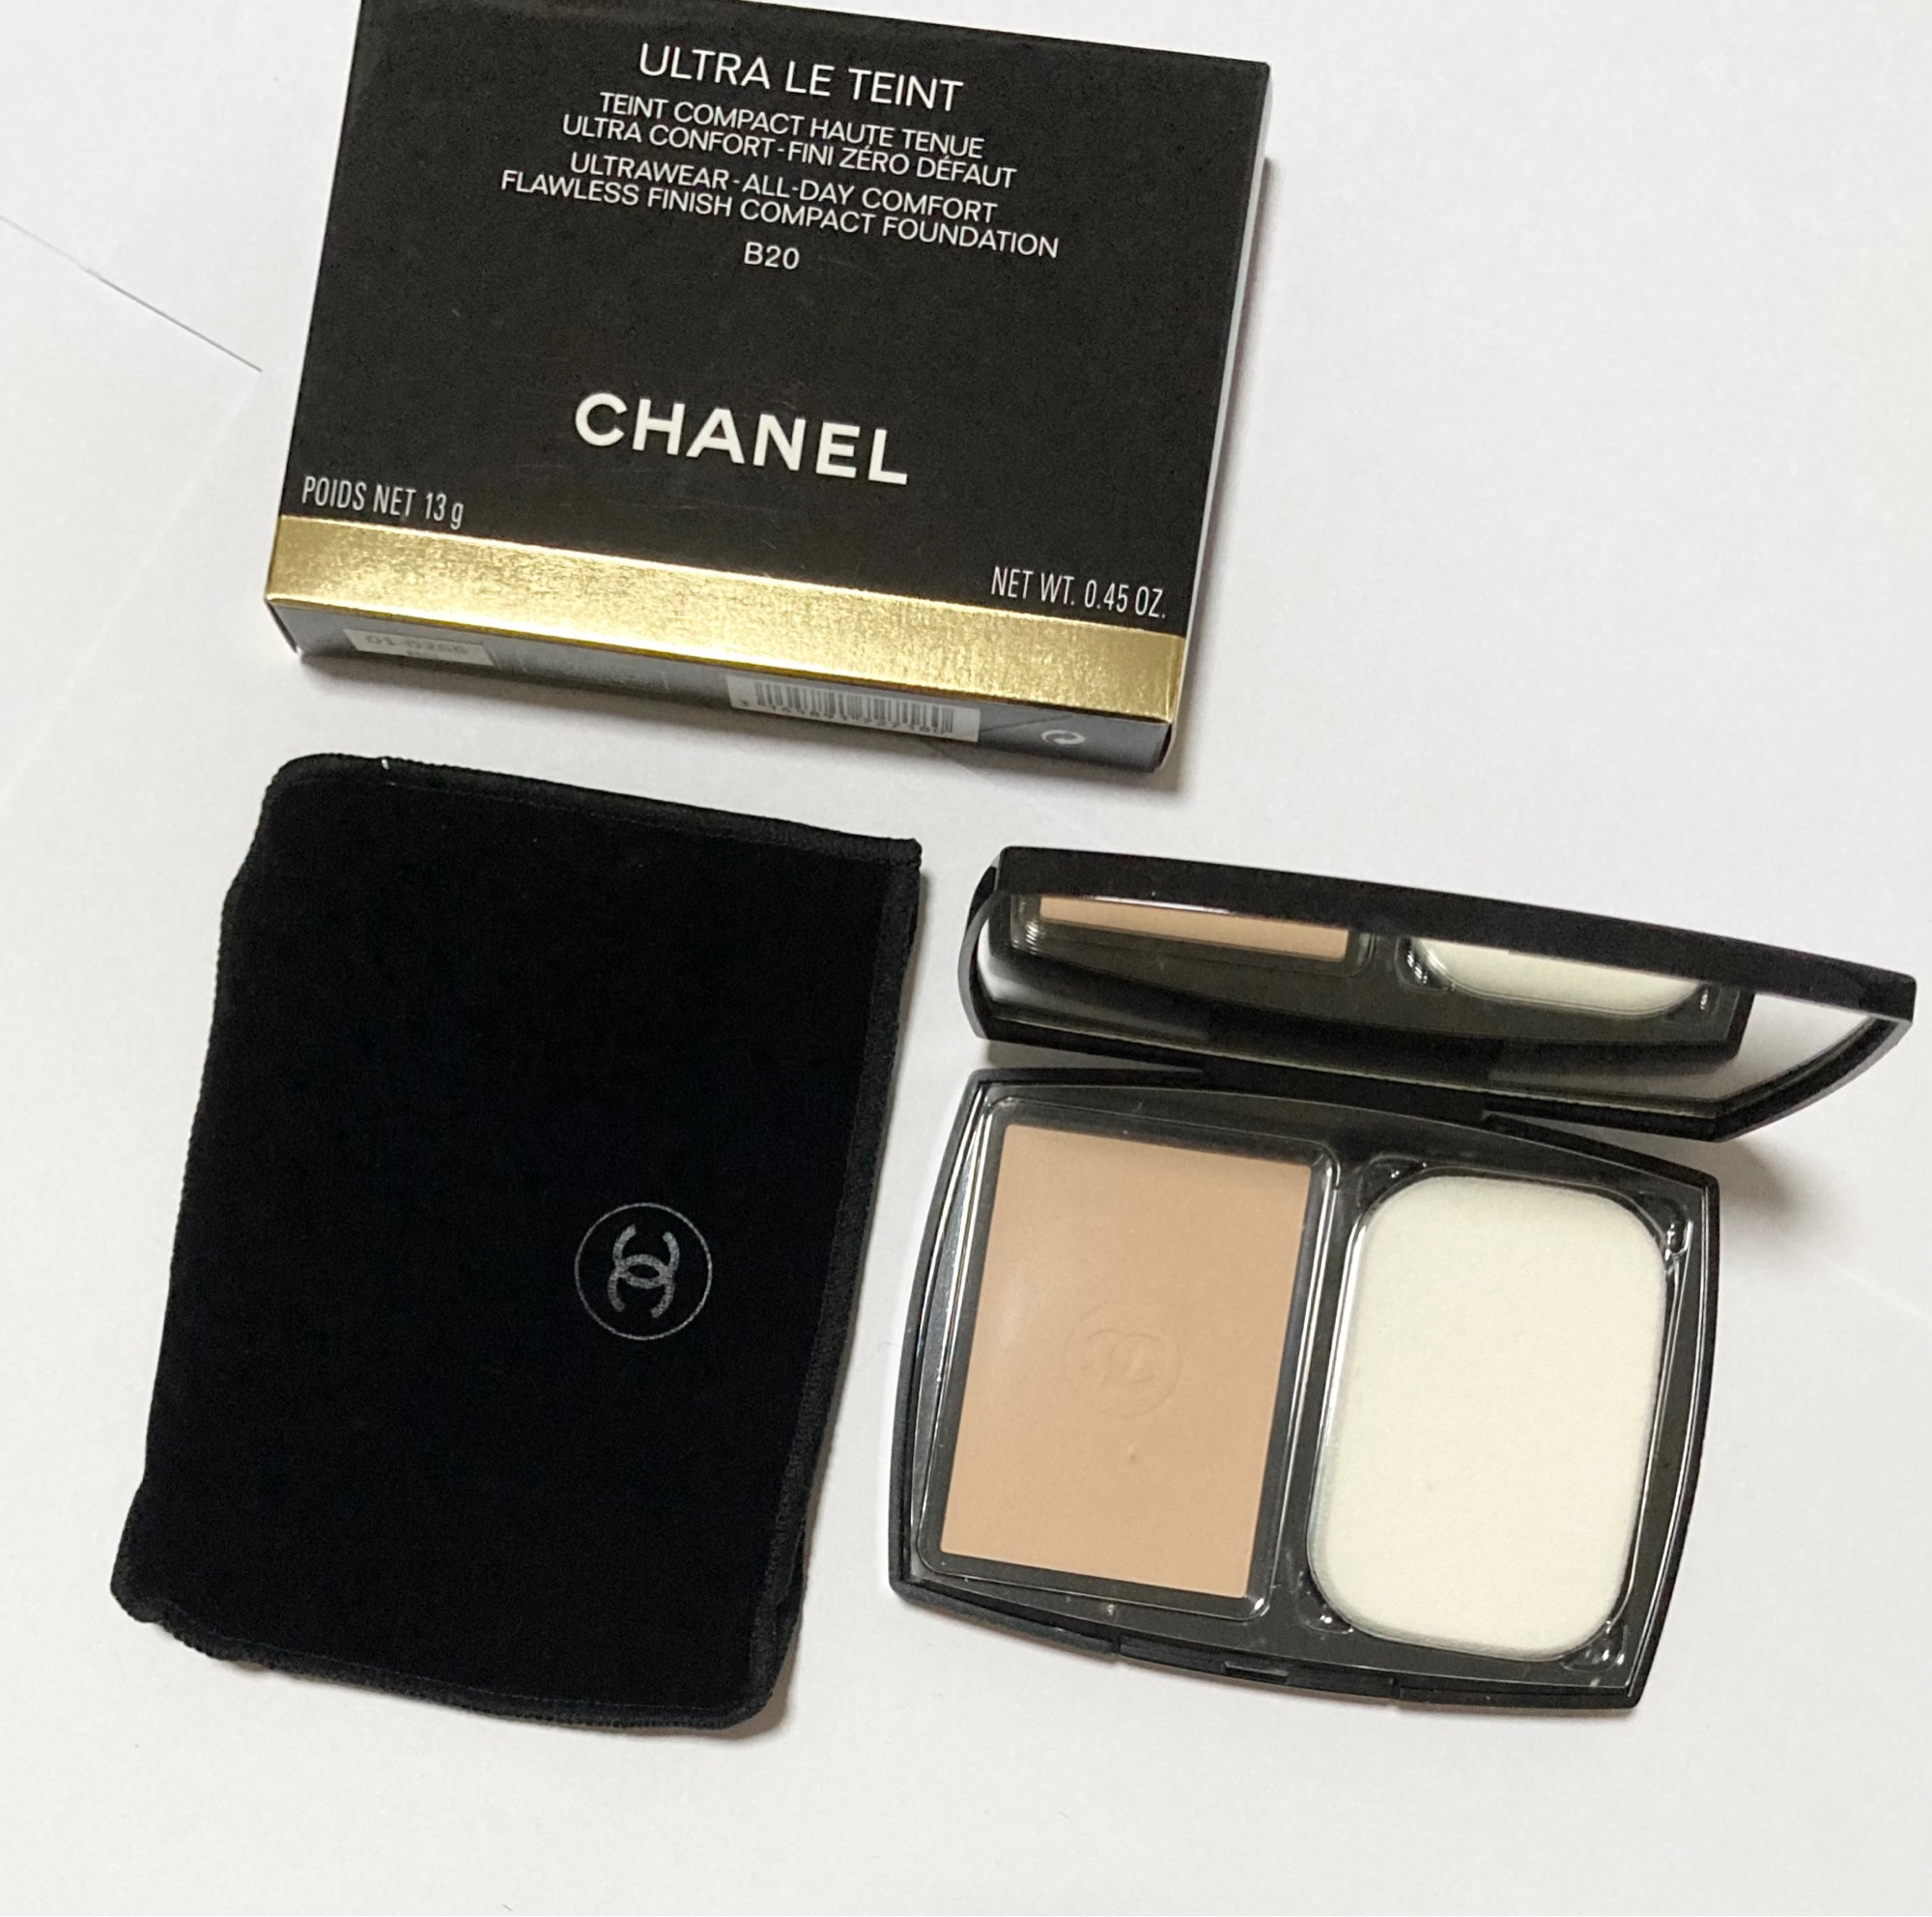  Chanel ULTRA LE TEINT Ultrawear All-Day Comfort Flawless  Finish Compact Foundation 0.45oz/13g (B20) : Beauty & Personal Care